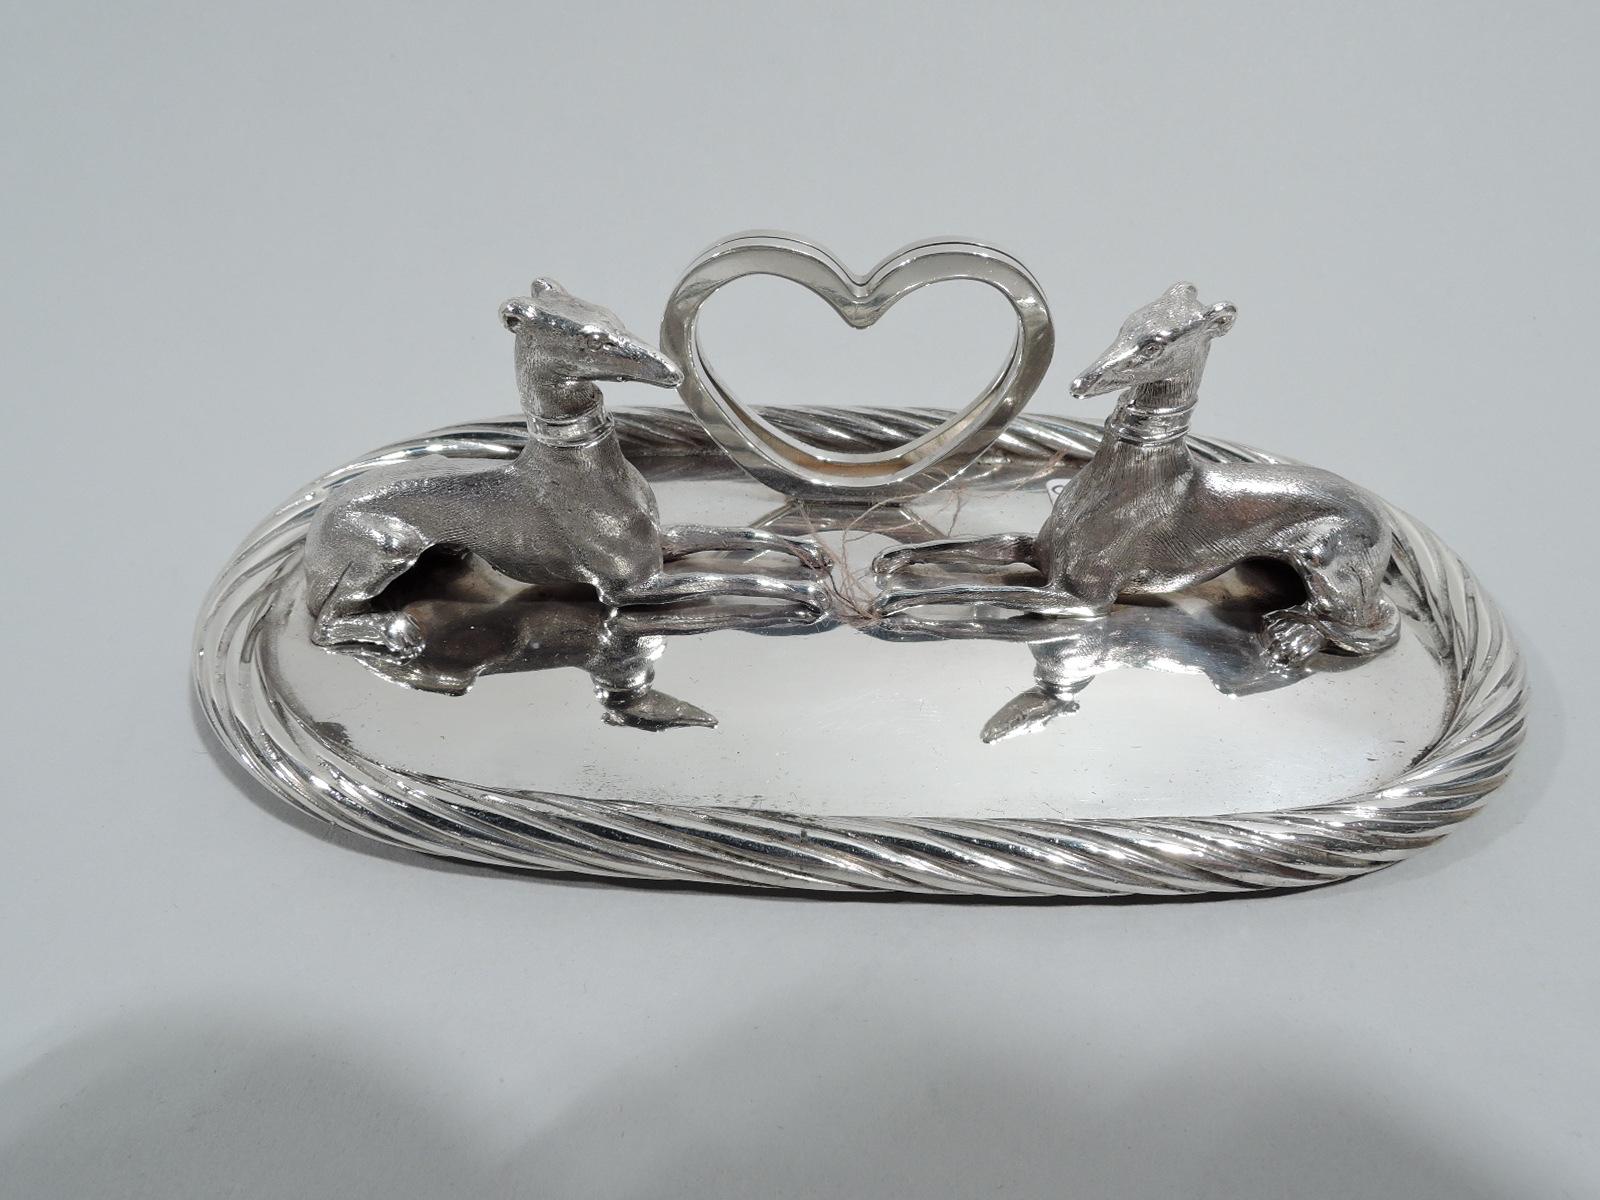 Set of 13 American Modern sterling silver place card holders, ca 1950. This set comprises 12 place card holders and 1 menu holder. Each: Cast figure of recumbent whippet with gracile limbs and imperious pointy head mounted to oval base with applied